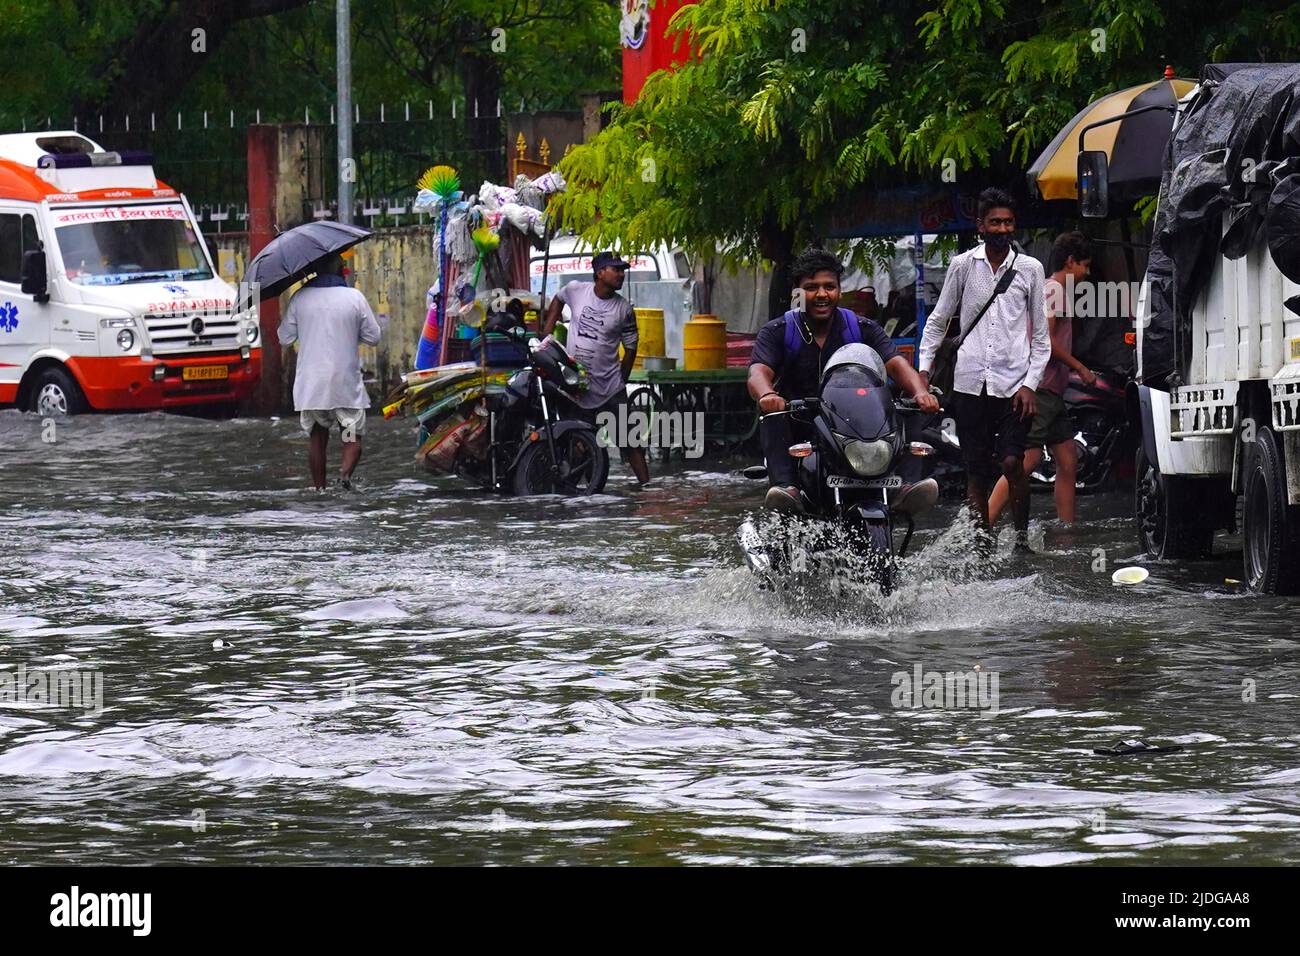 Rajasthan India On June 20 2022 Indian People Make Their Way Through A Waterlogged Road After